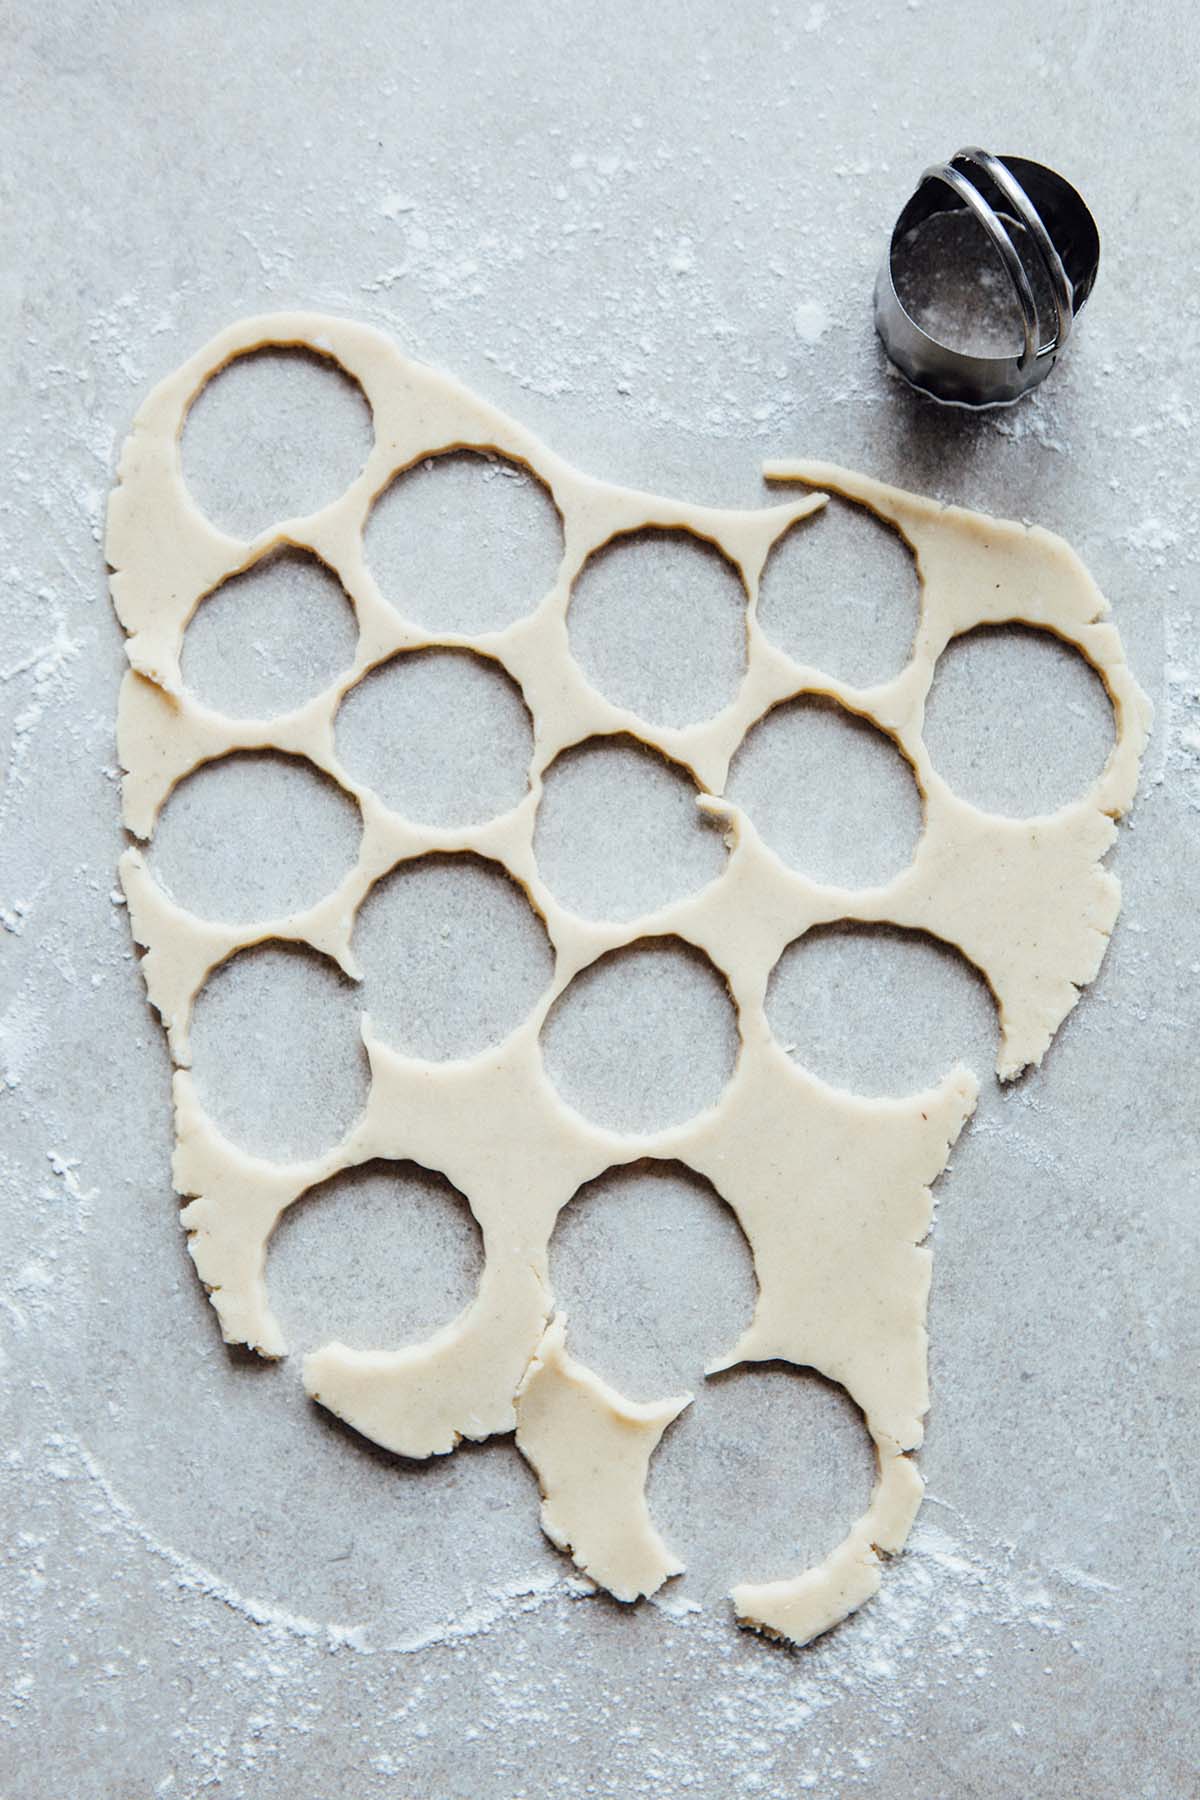 Rolled cookie dough with cut outs removed.